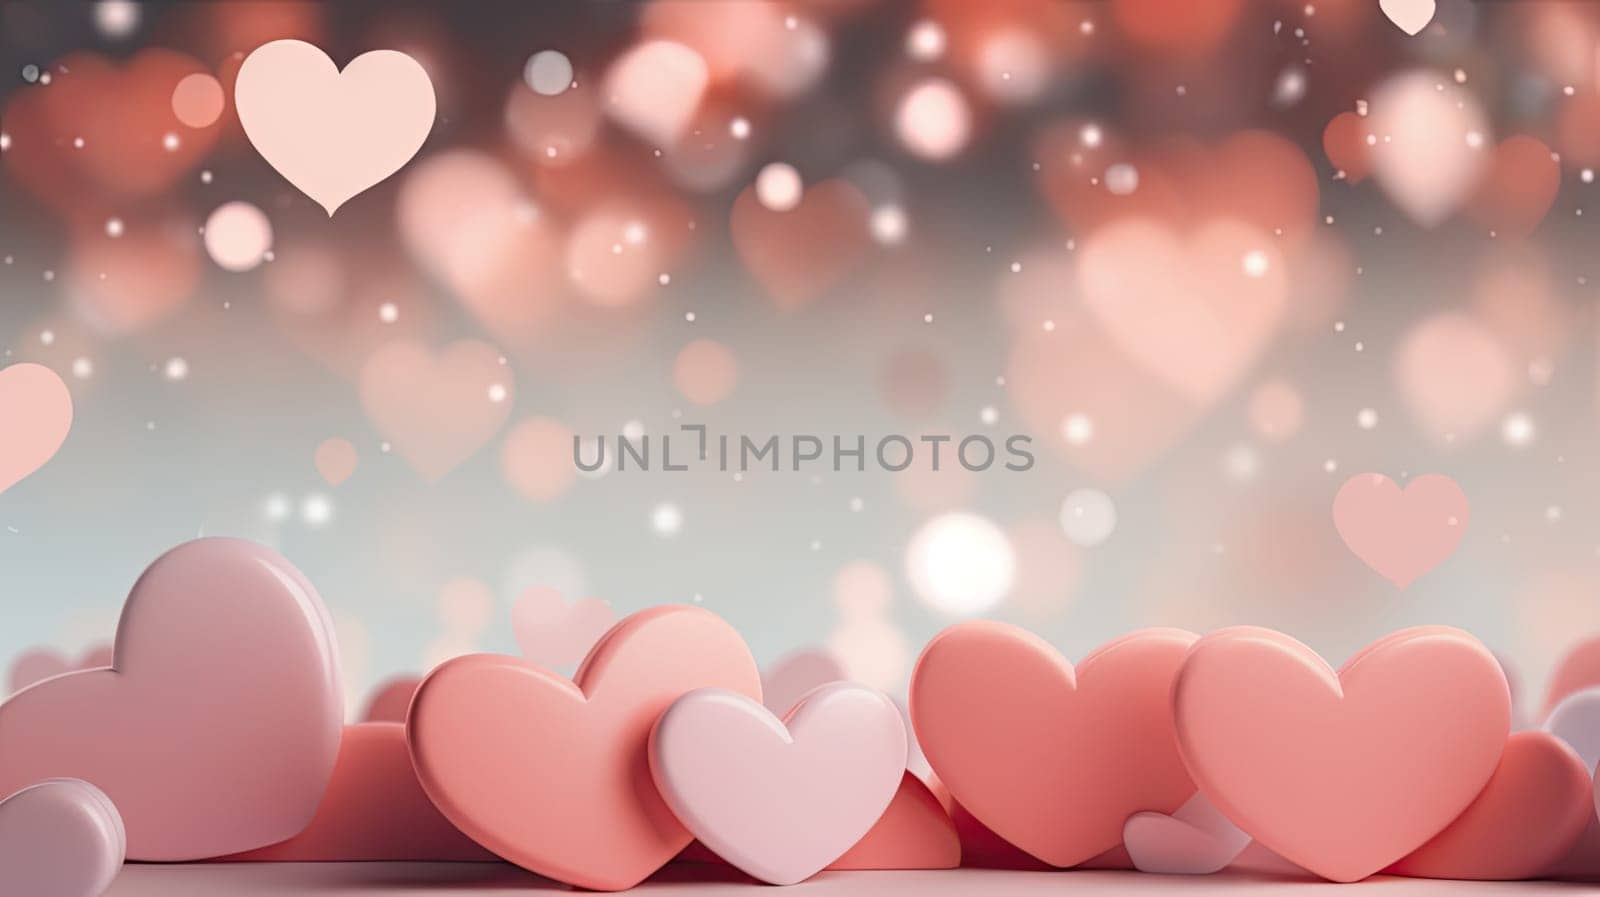 Pink hearts on different tones with blurred background and copy space. Love and san valentine concept. by papatonic